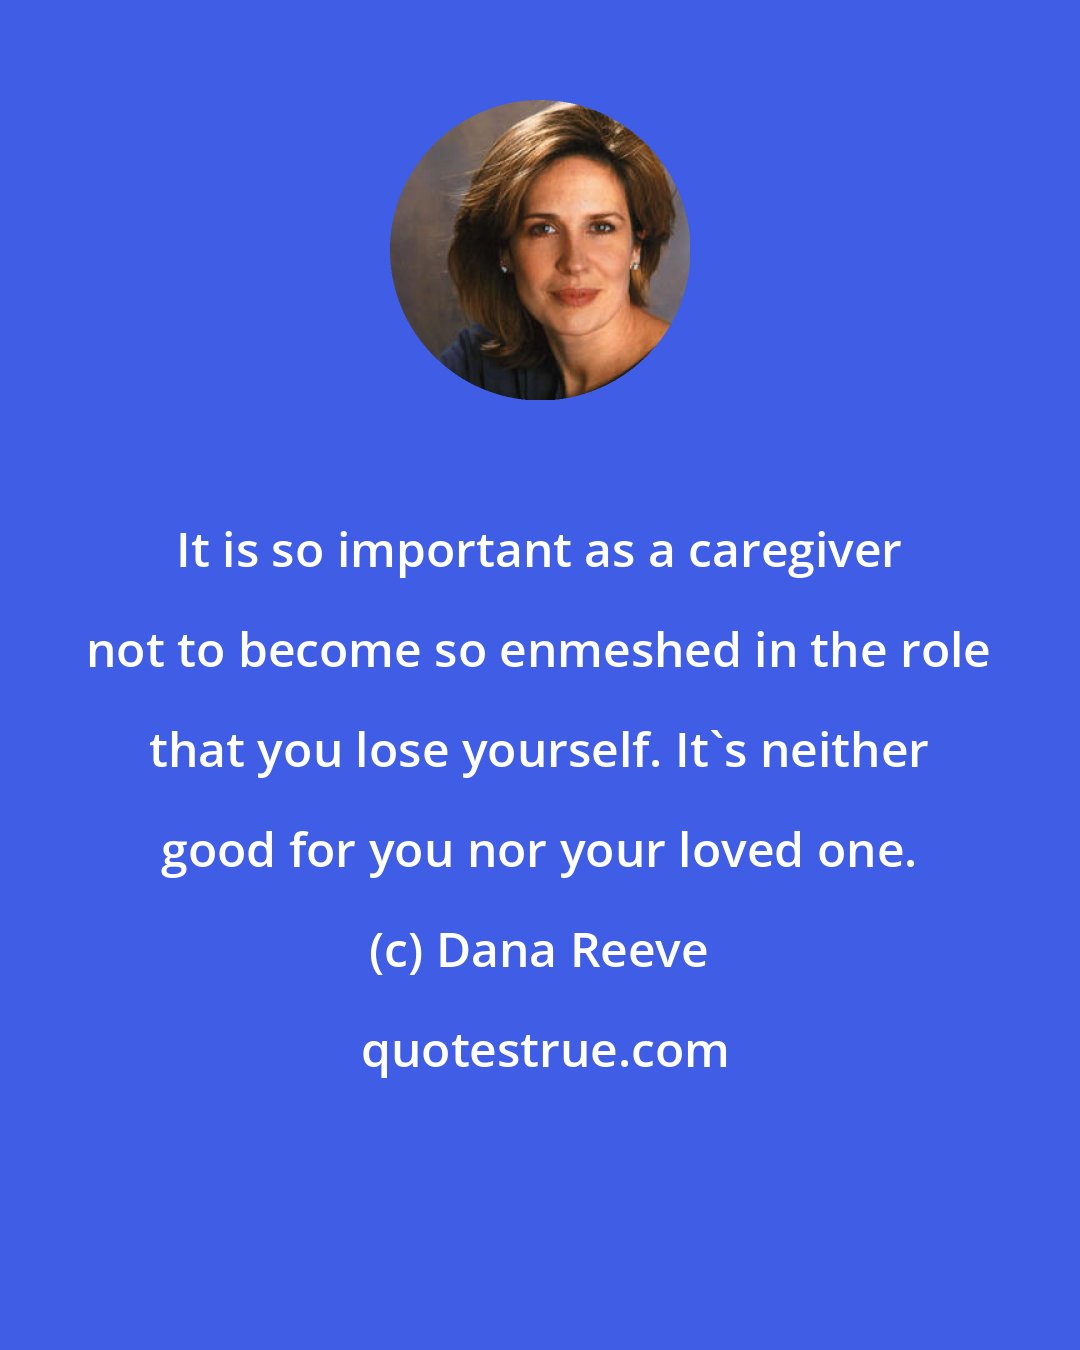 Dana Reeve: It is so important as a caregiver not to become so enmeshed in the role that you lose yourself. It's neither good for you nor your loved one.